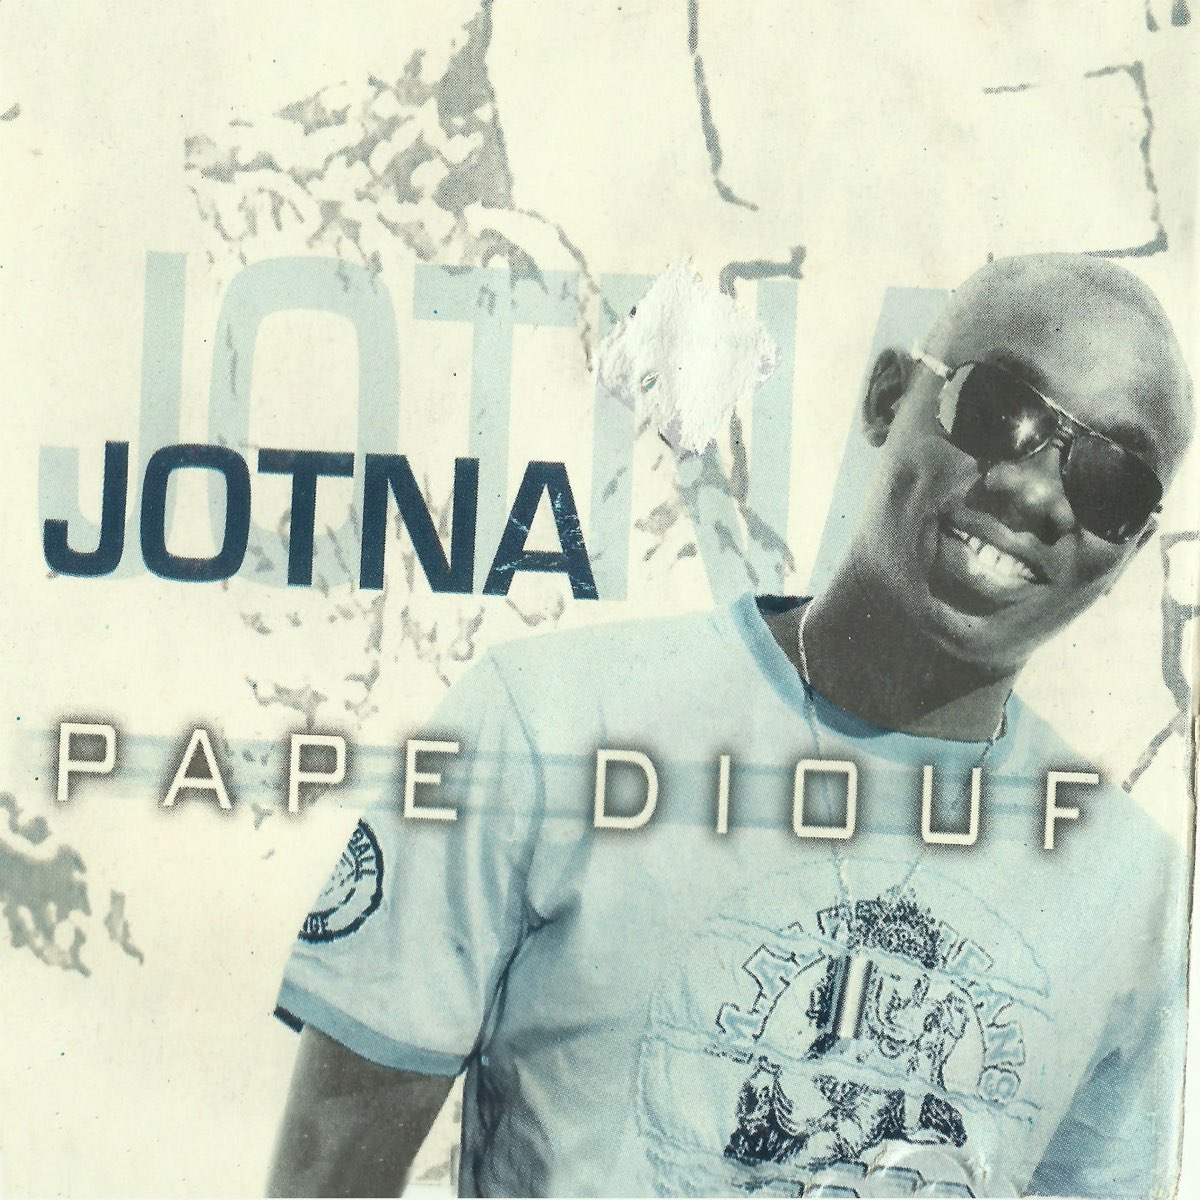 7 Seconds feat. Coco Pape Diouf. Joezi feat. Coco Pape Diouf 7 seconds. Joezi 7 seconds feat coco pape diouf